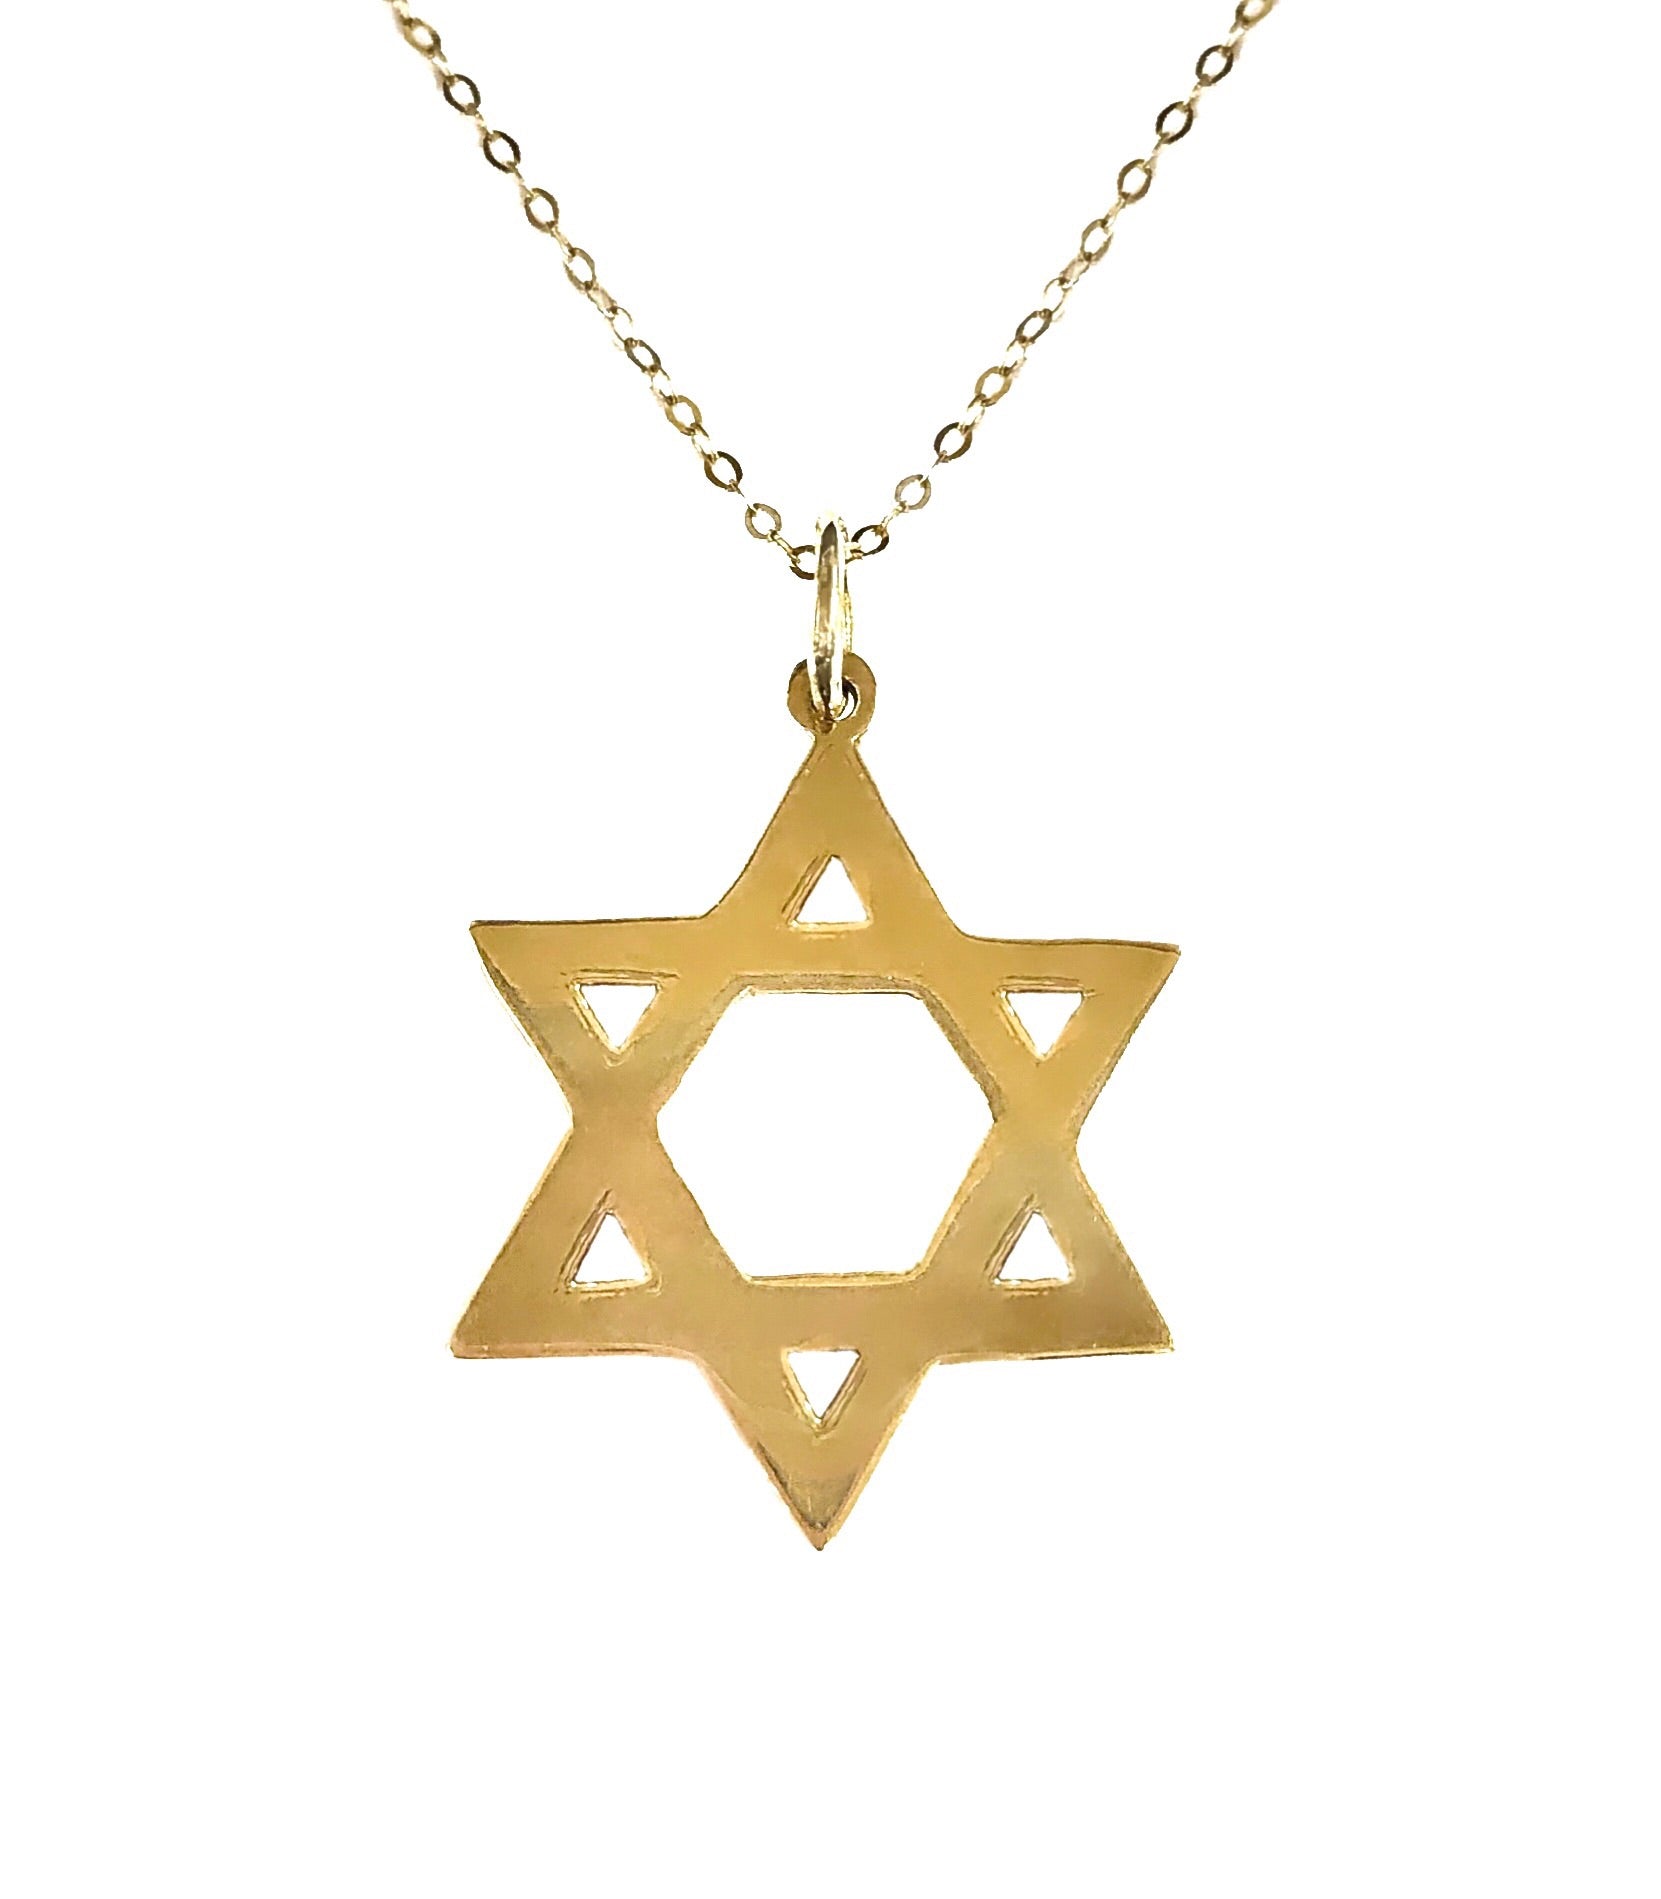 POLISHED HAND-CUT STAR OF DAVID NECKLACE